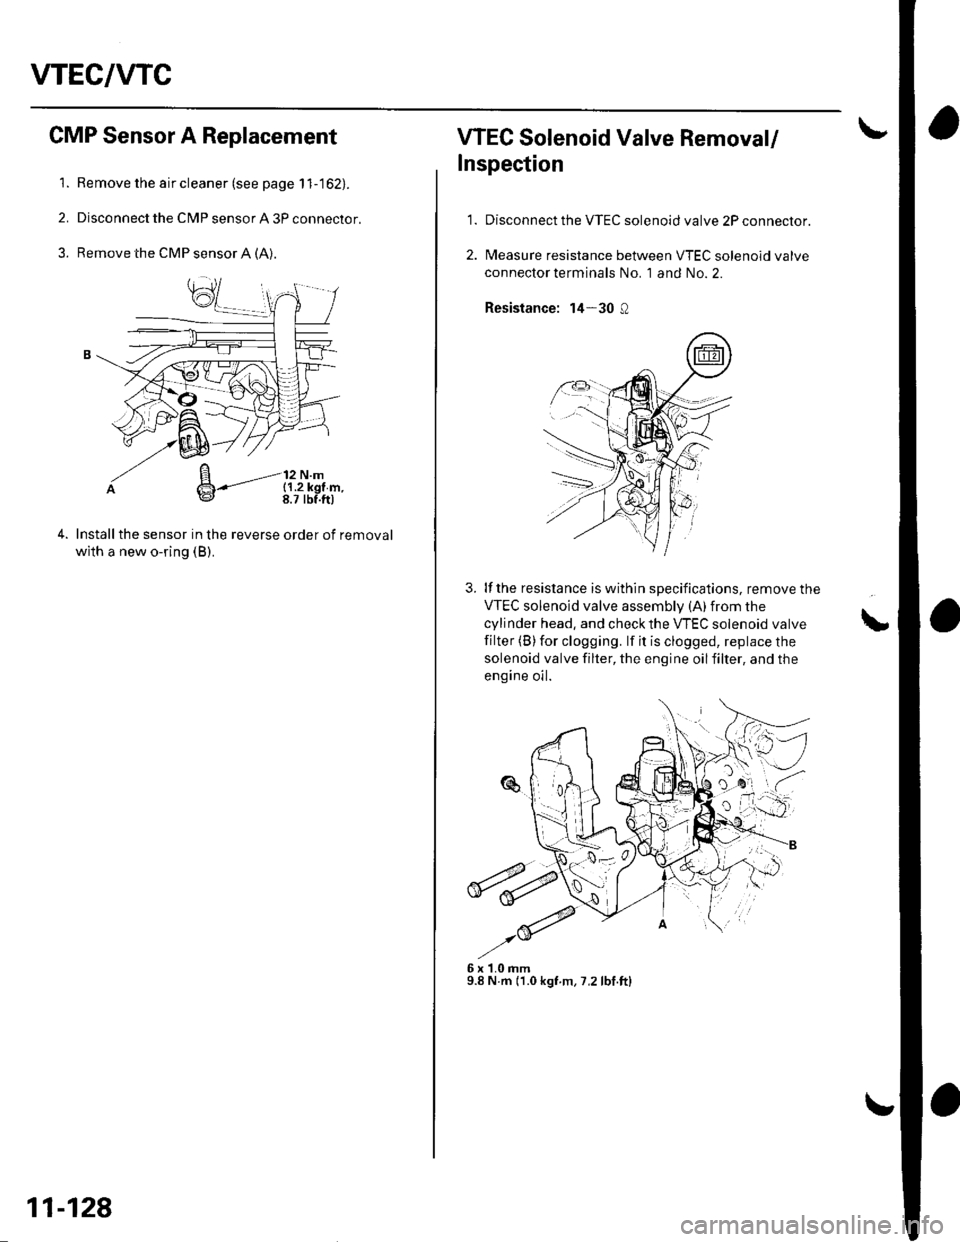 HONDA CIVIC 2003 7.G Workshop Manual VTEC/WC
1.
CMP Sensor A Replacement
Remove the air cleaner (see page 1 1-162).
Disconnect the CMP sensor A 3P connector.
Remove the CMP sensor A (A).
Installthe sensor in the reverse order of removal
